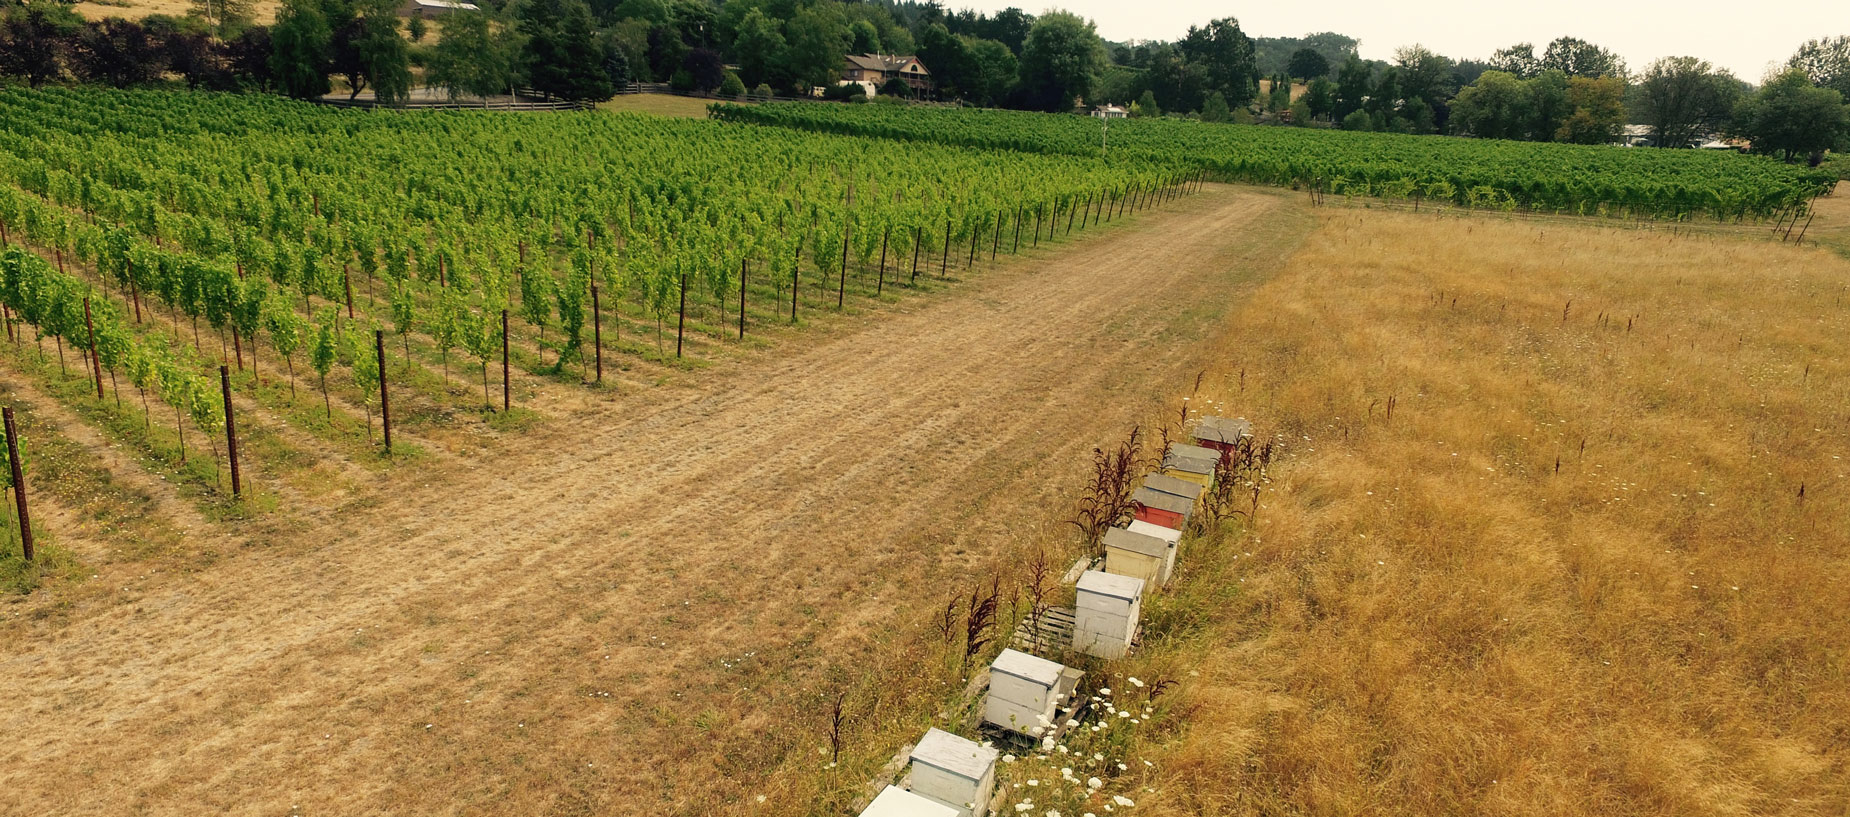 View of the vineyard and bee hives